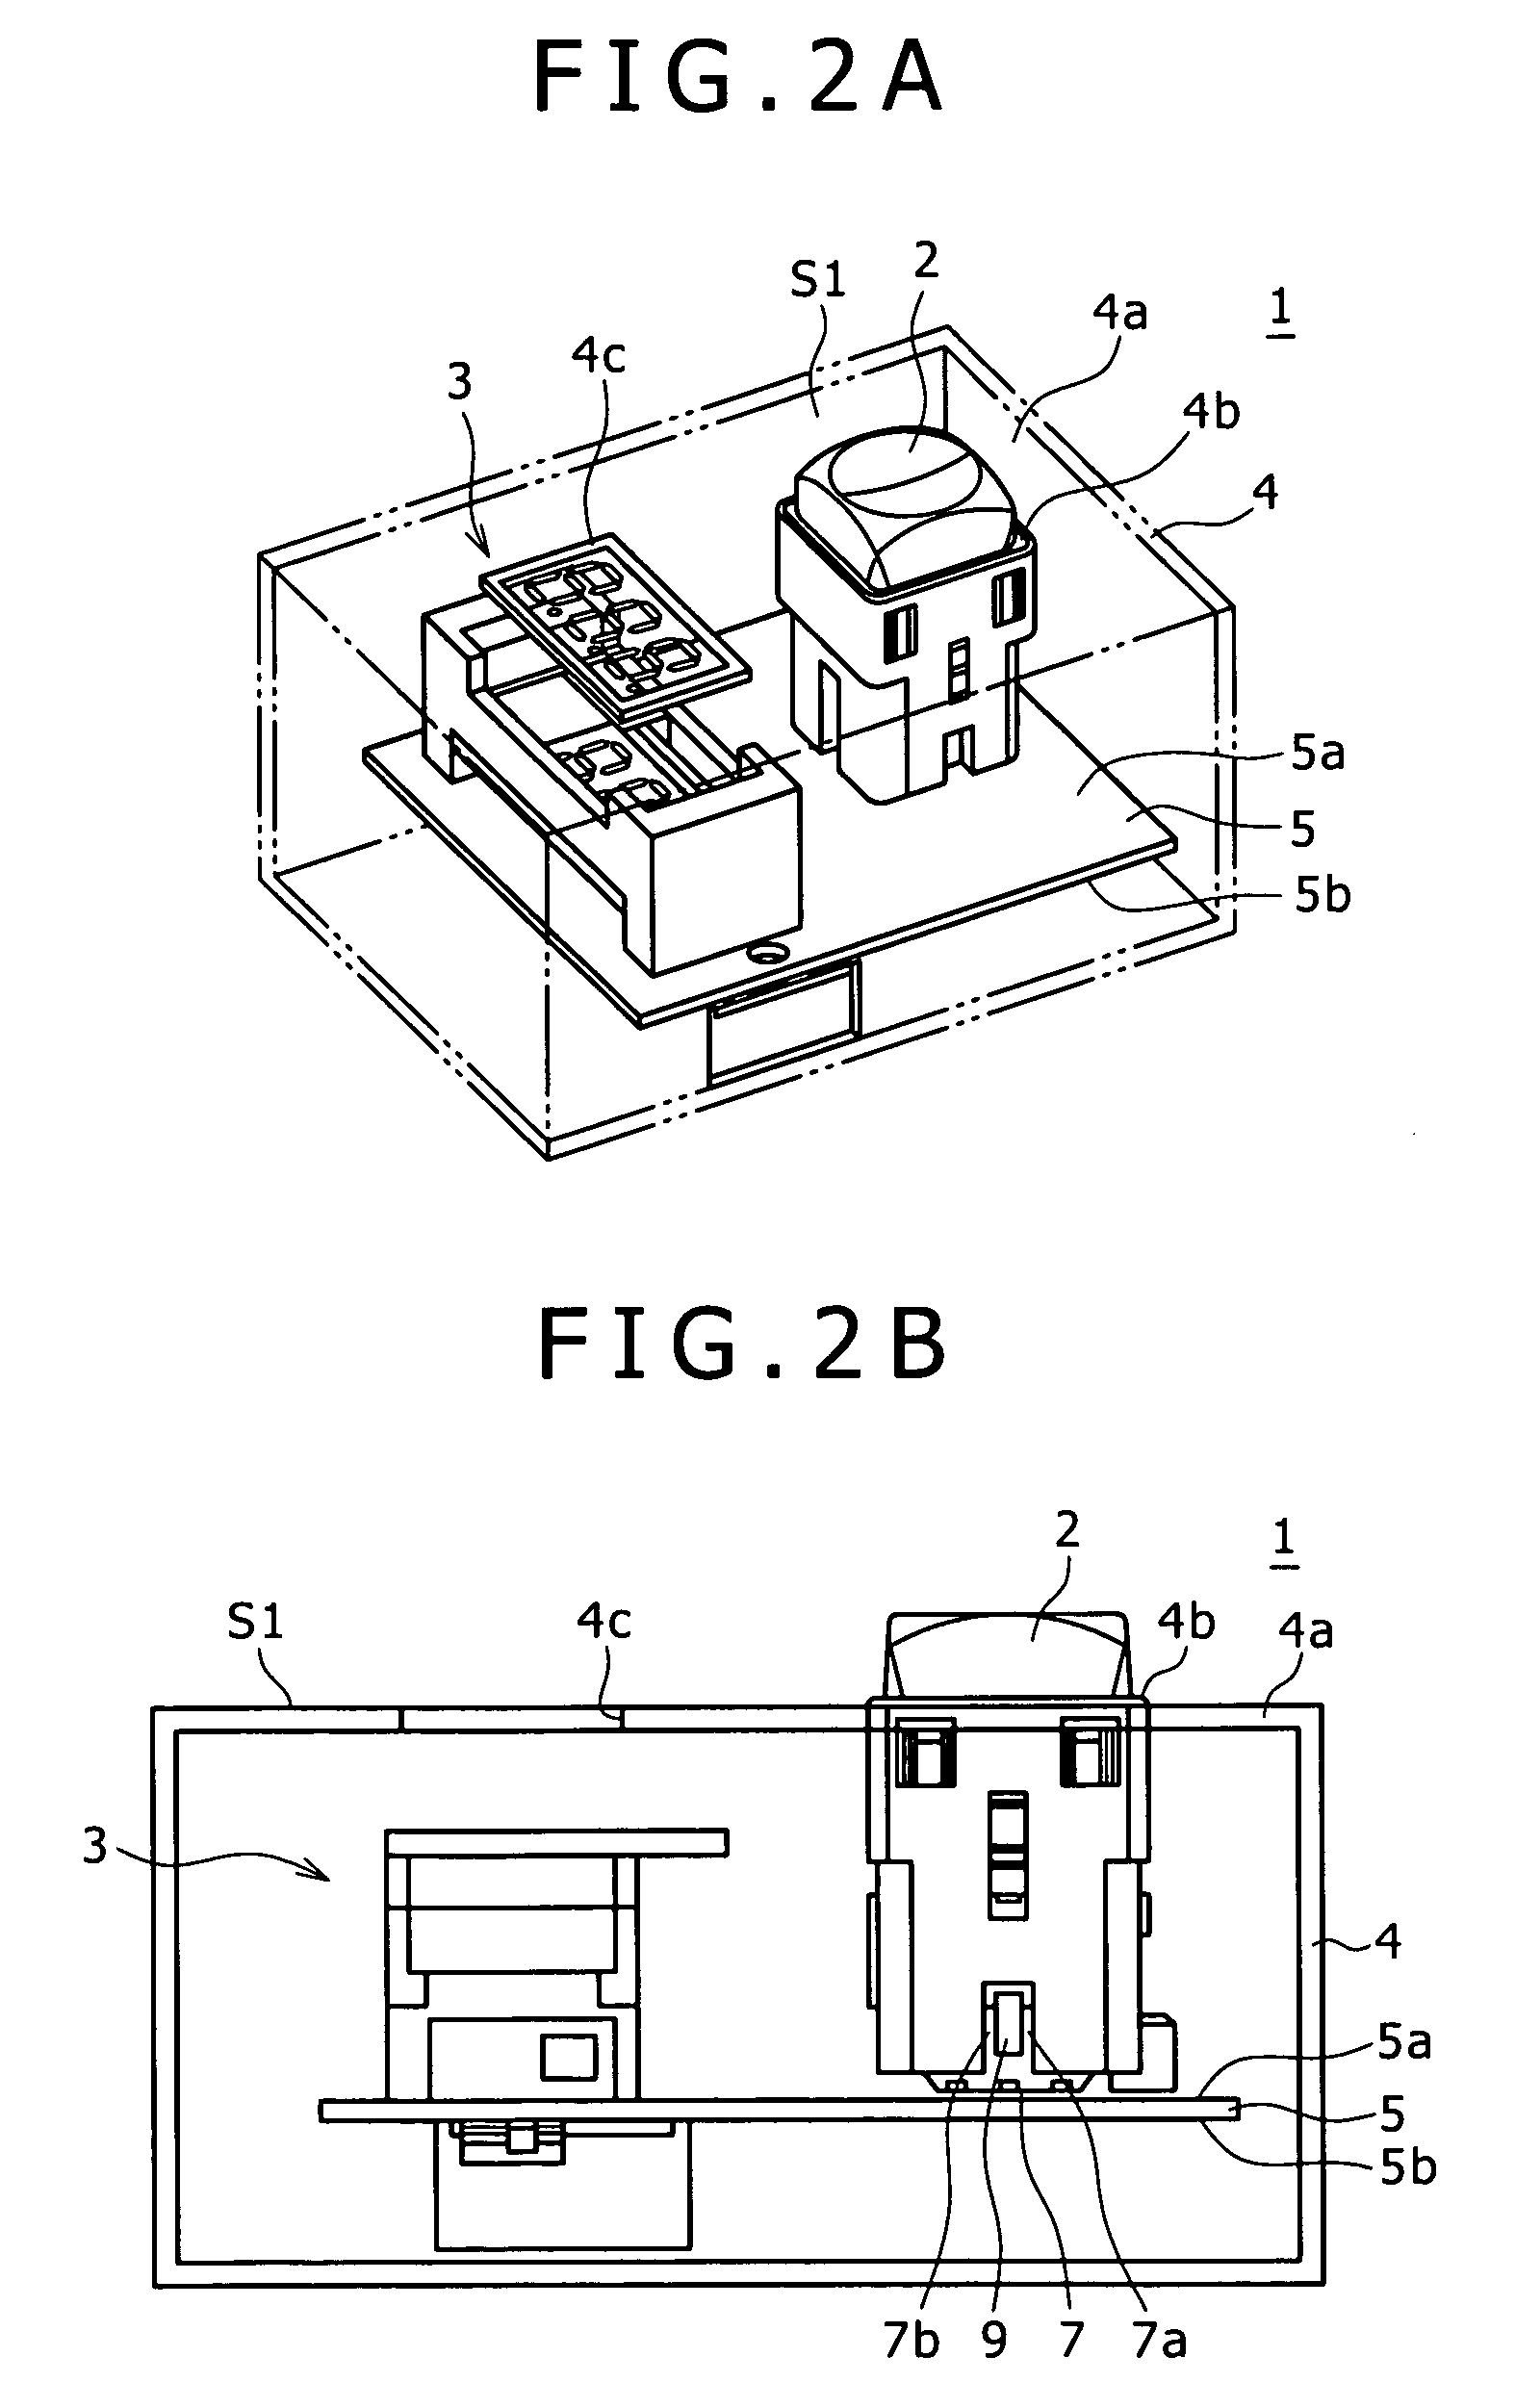 Control panel device and display